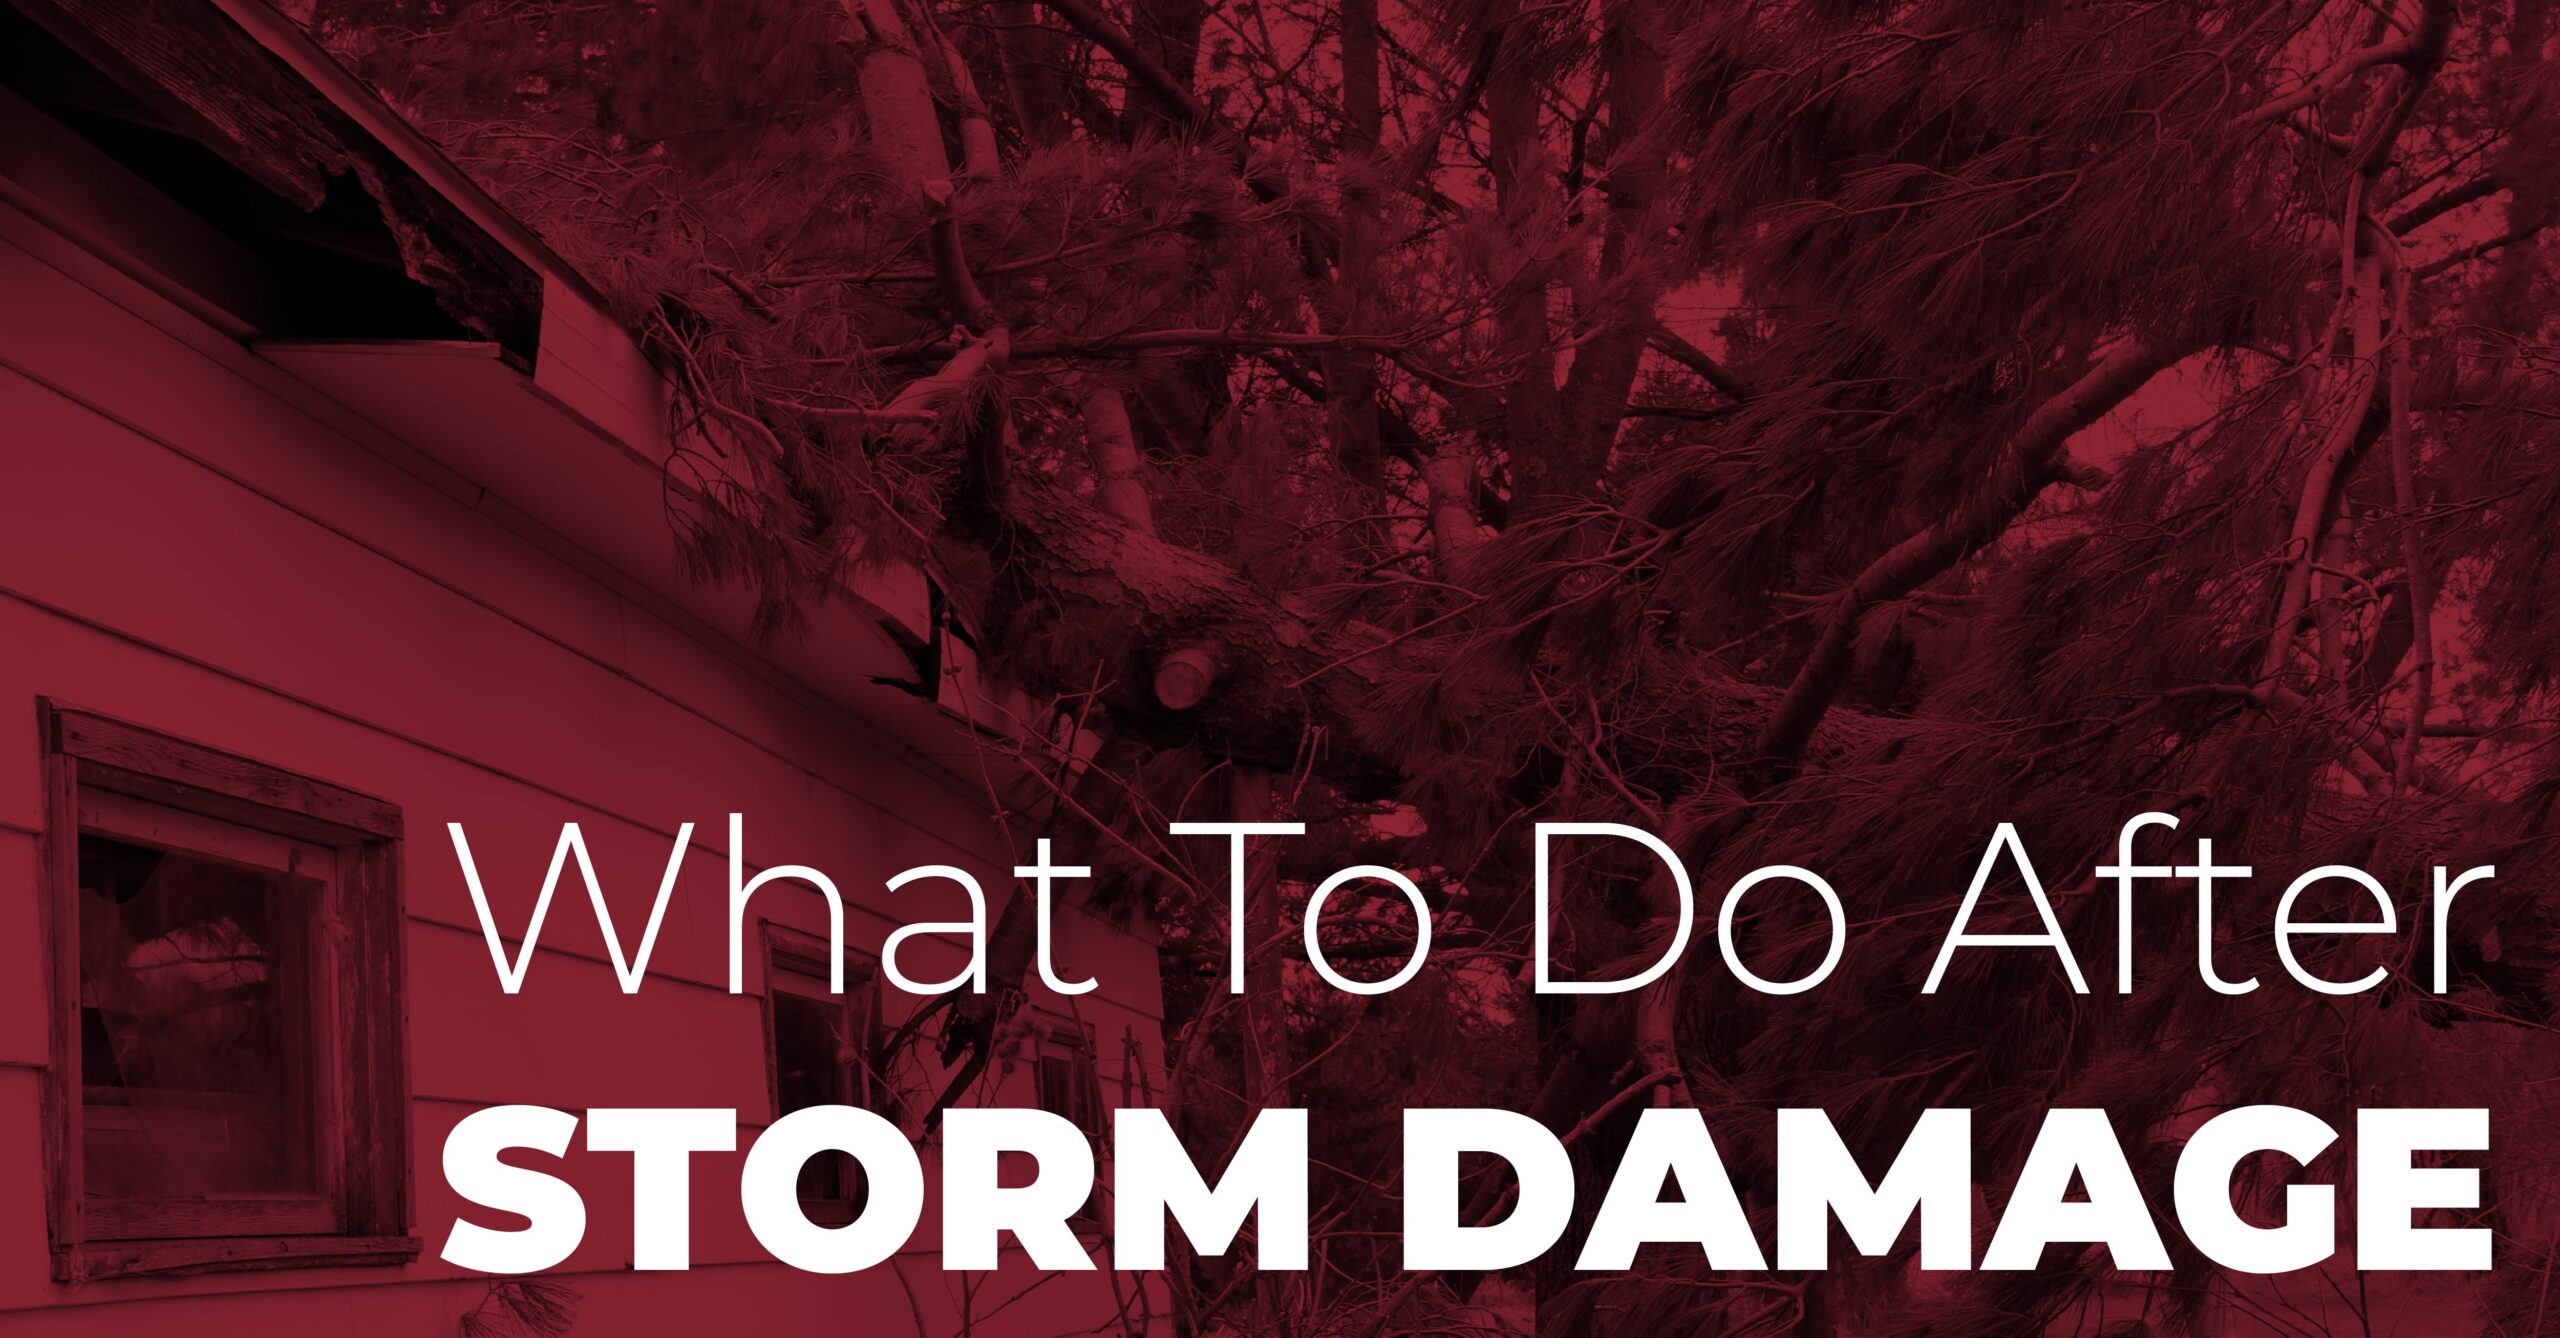 What To Do After Storm Damage